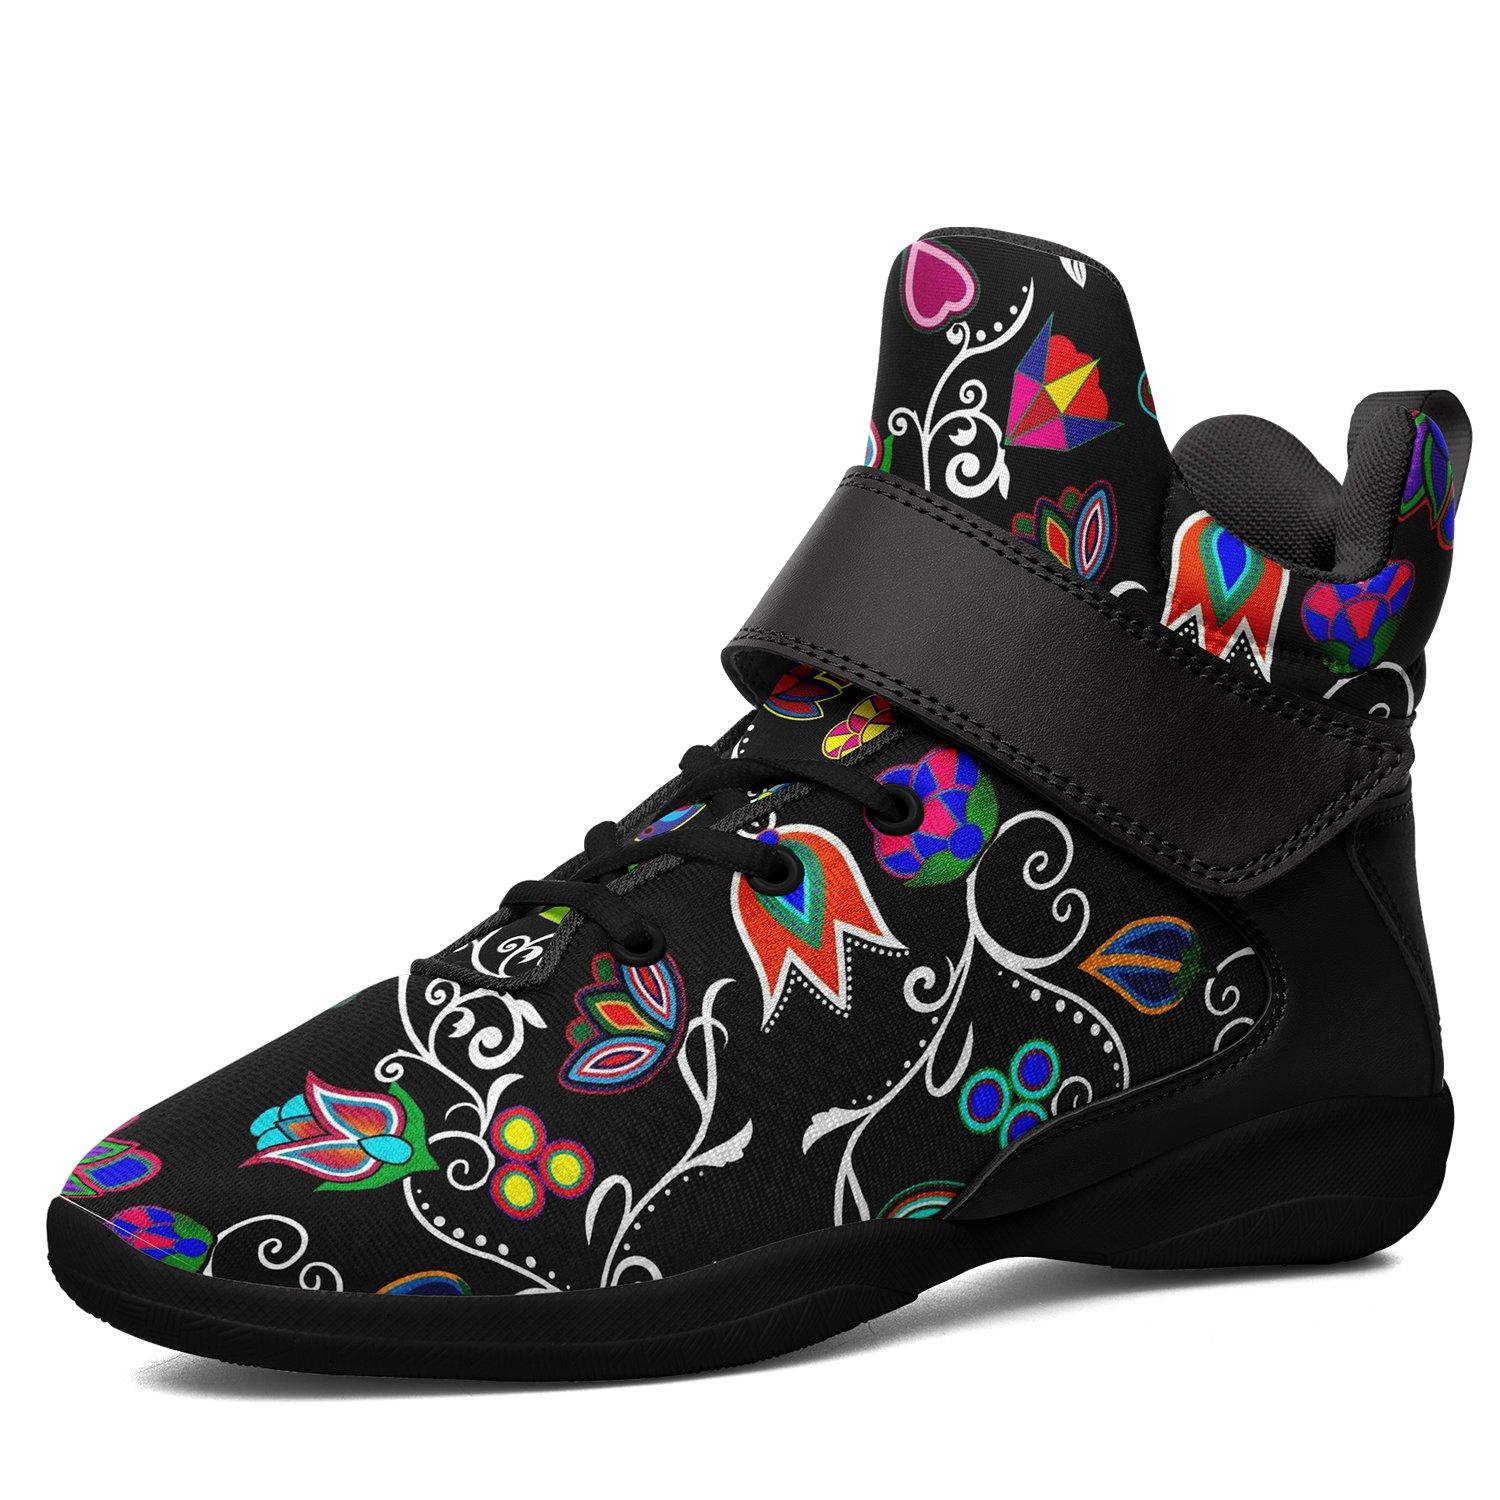 Indigenous Paisley Black Ipottaa Basketball / Sport High Top Shoes 49 Dzine US Women 4.5 / US Youth 3.5 / EUR 35 Black Sole with Black Strap 